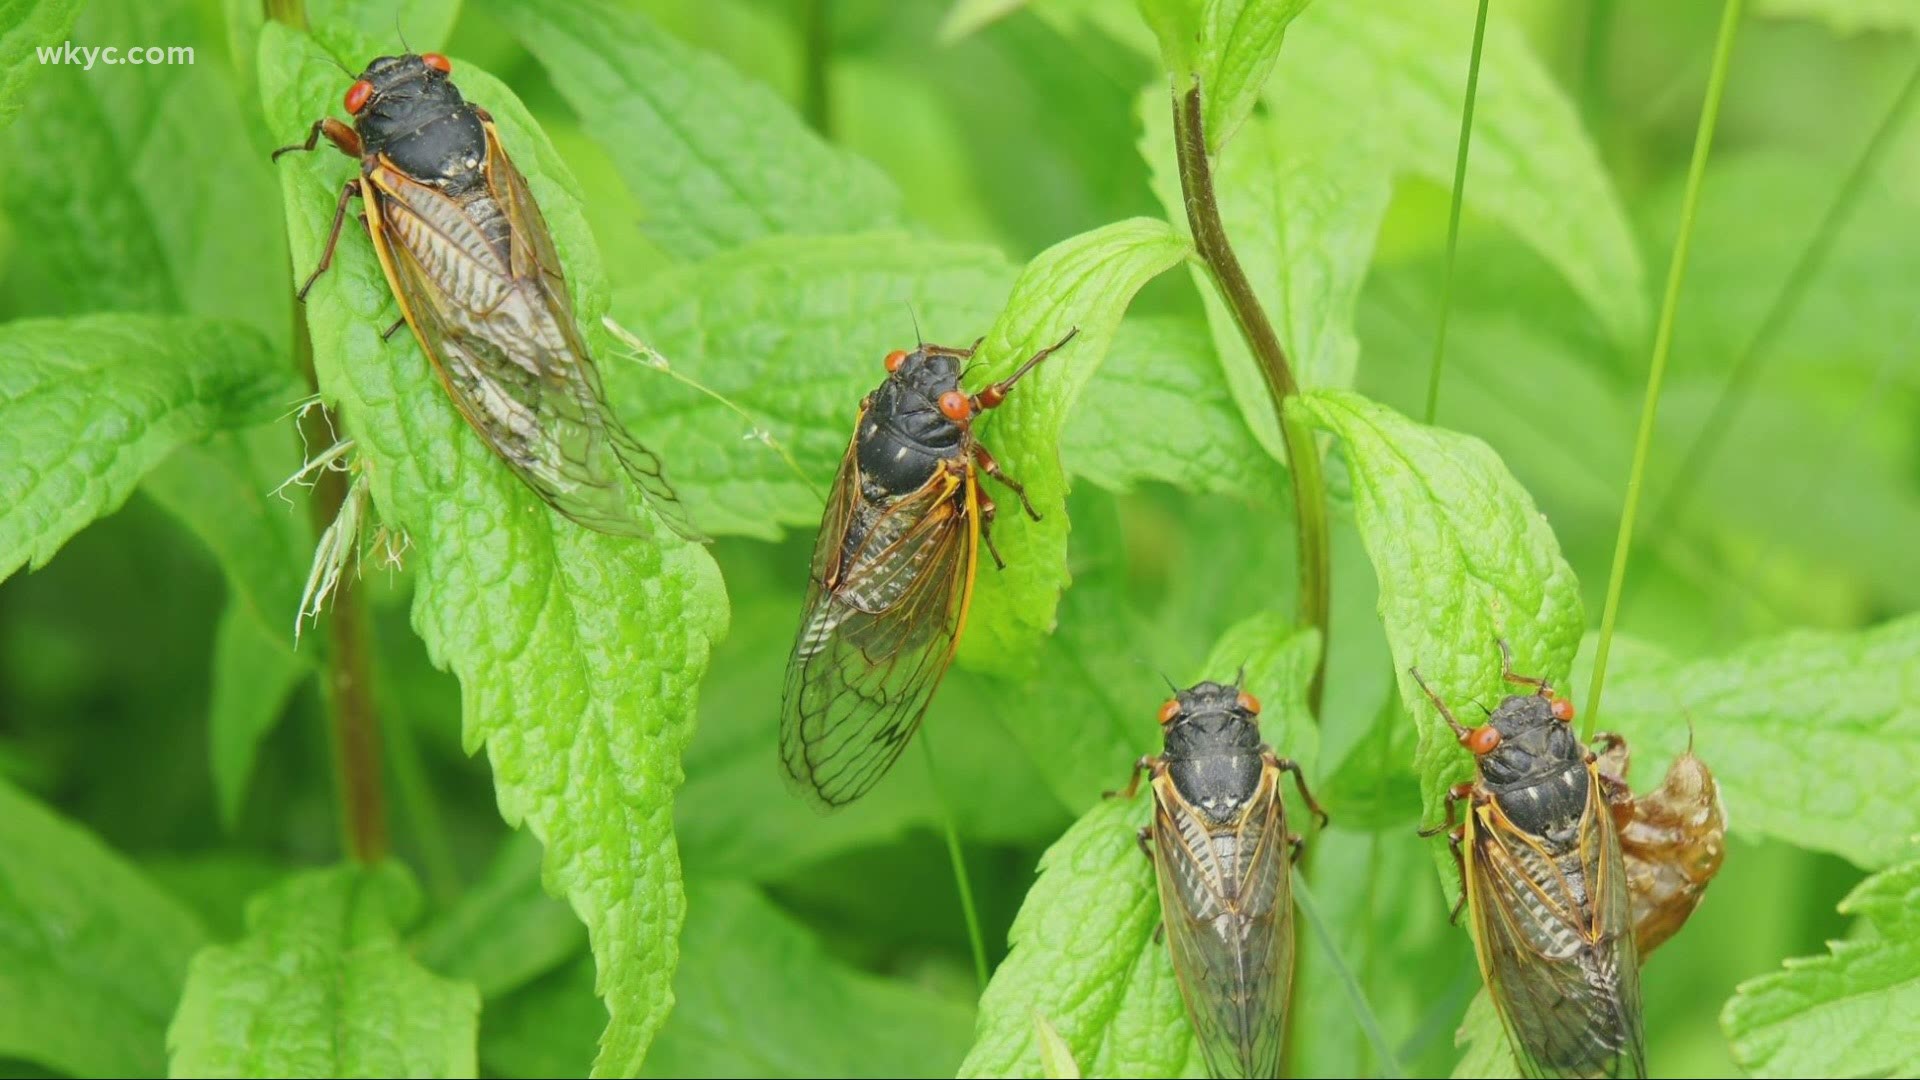 Billions of the 17-year variety of cicada will rise from the ground in the coming weeks. They are edible, and at least one song has been written in tribute.